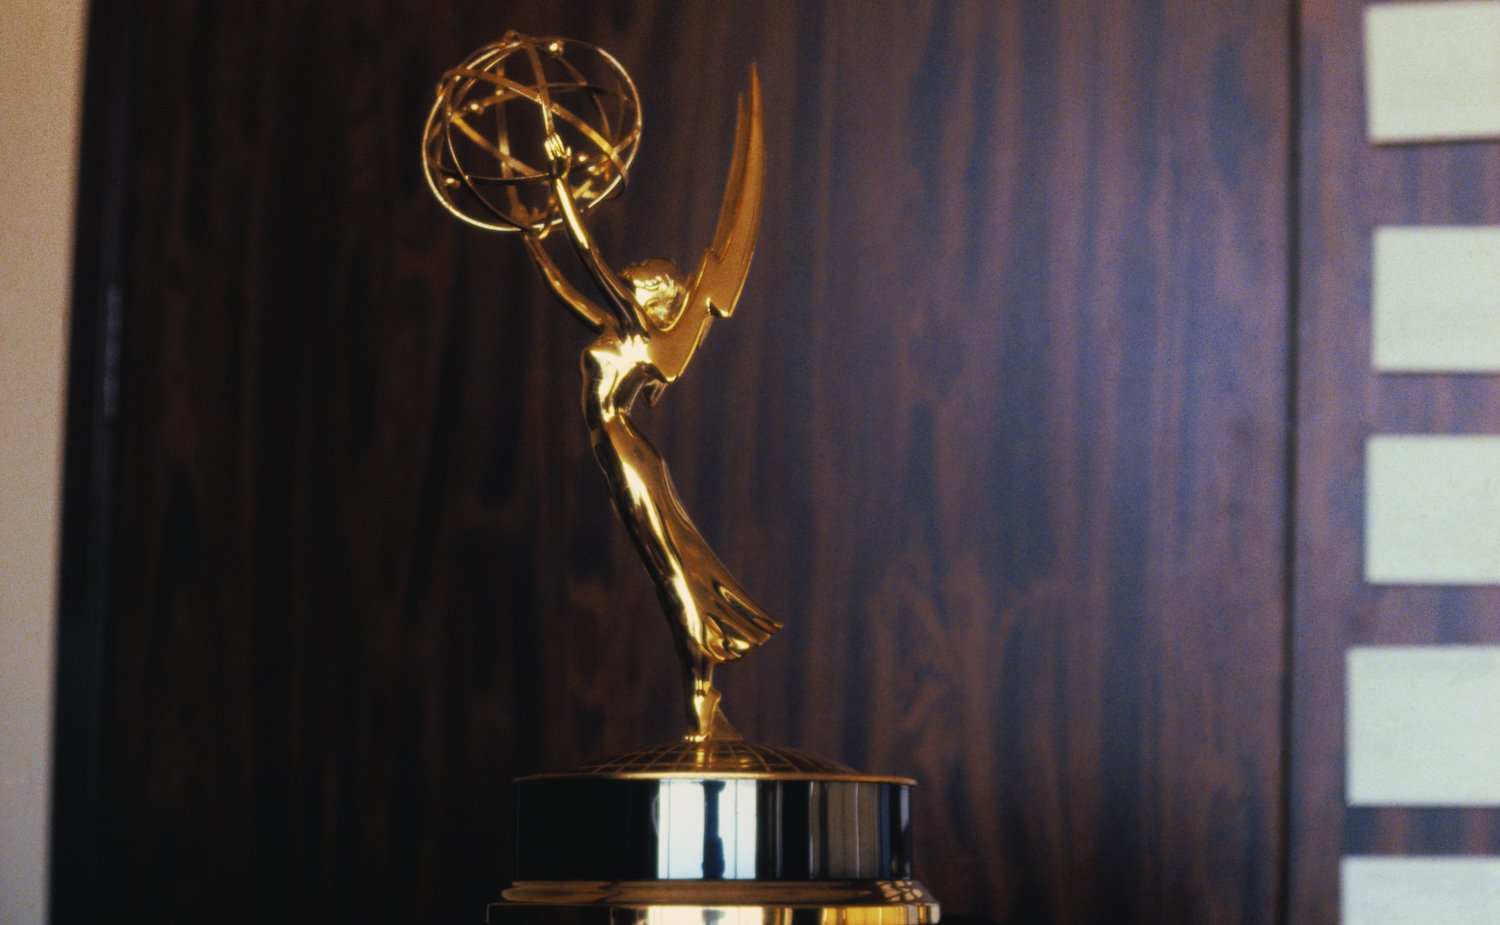 The Emmy statue. Here are our Emmys 2022 predictions for Outstanding Drama Series.